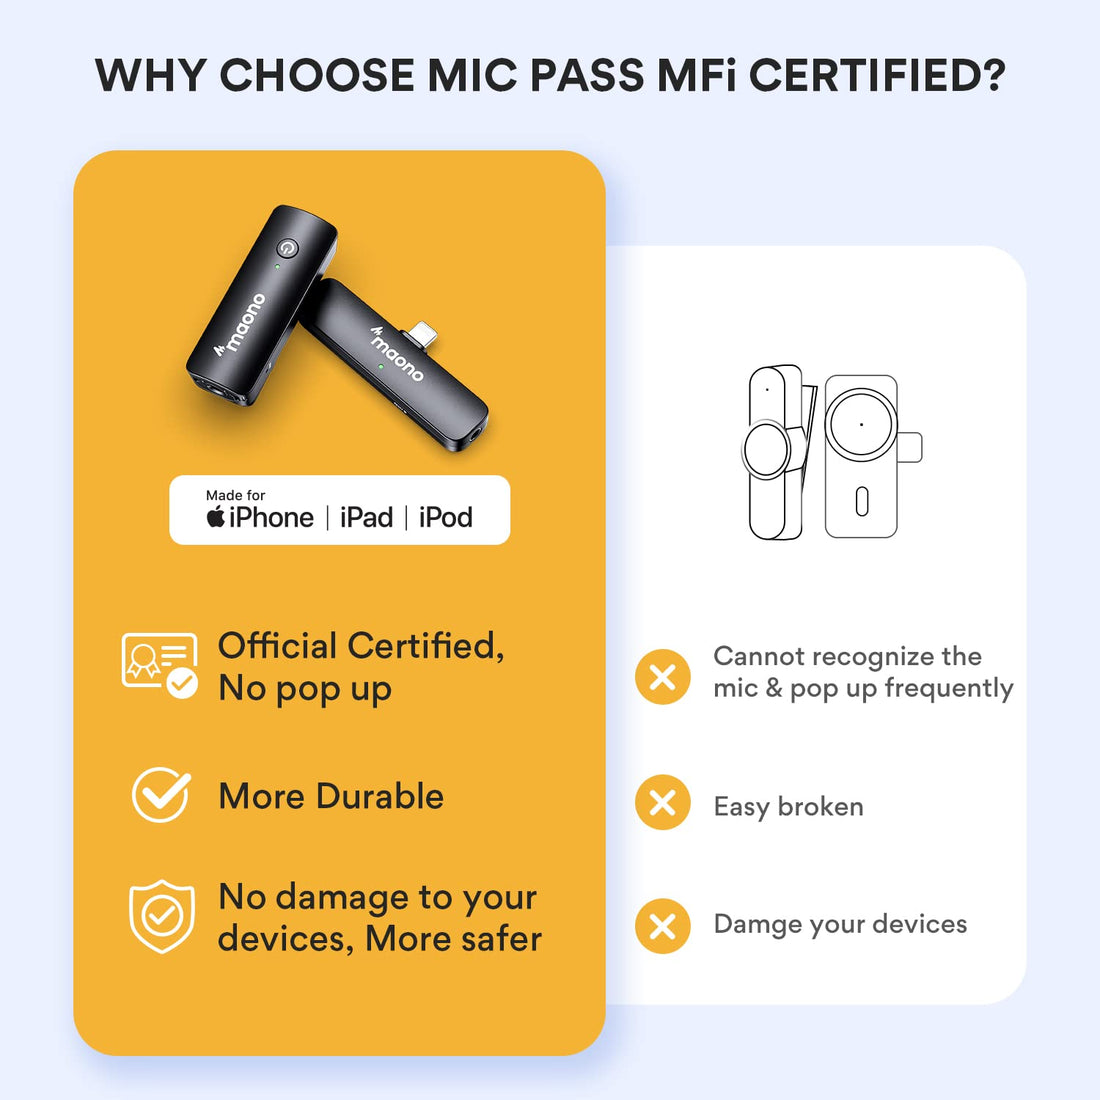 Wireless-Lavalier-Microphone for iPhone, MAONO 2.4GHz Wireless Lapel Mic with MFi Certified for iPad with One Key Noise Reduction Function for TikTok, Interview, Vlogging, Live Streaming(WM600 B1)